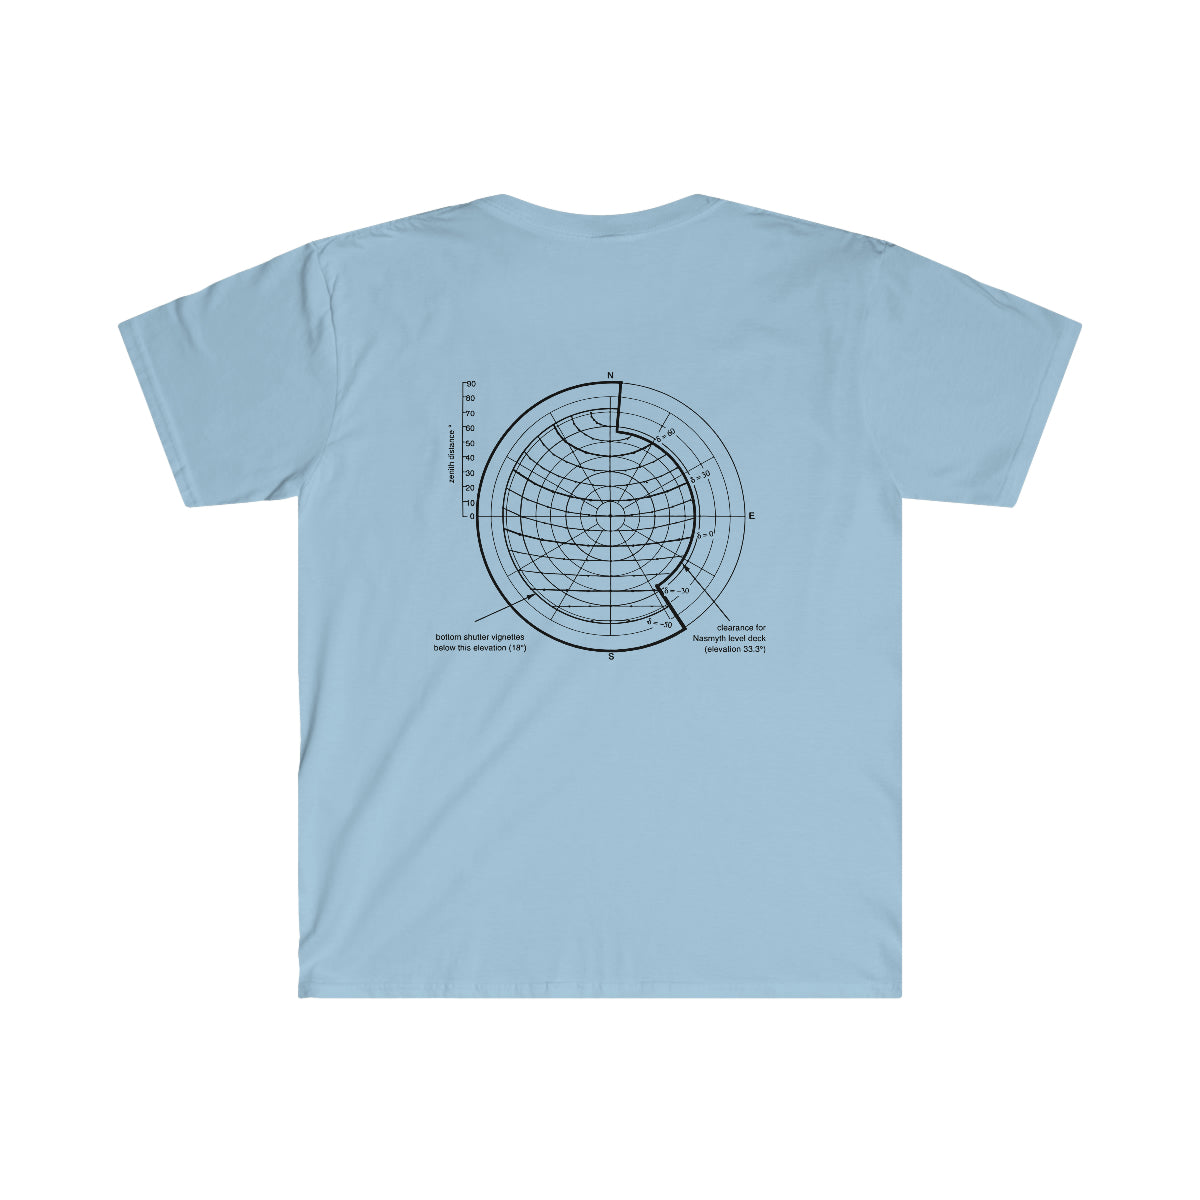 A light blue Spherical Angles T-Shirt made of cotton with an image of a globe available in different sizes.